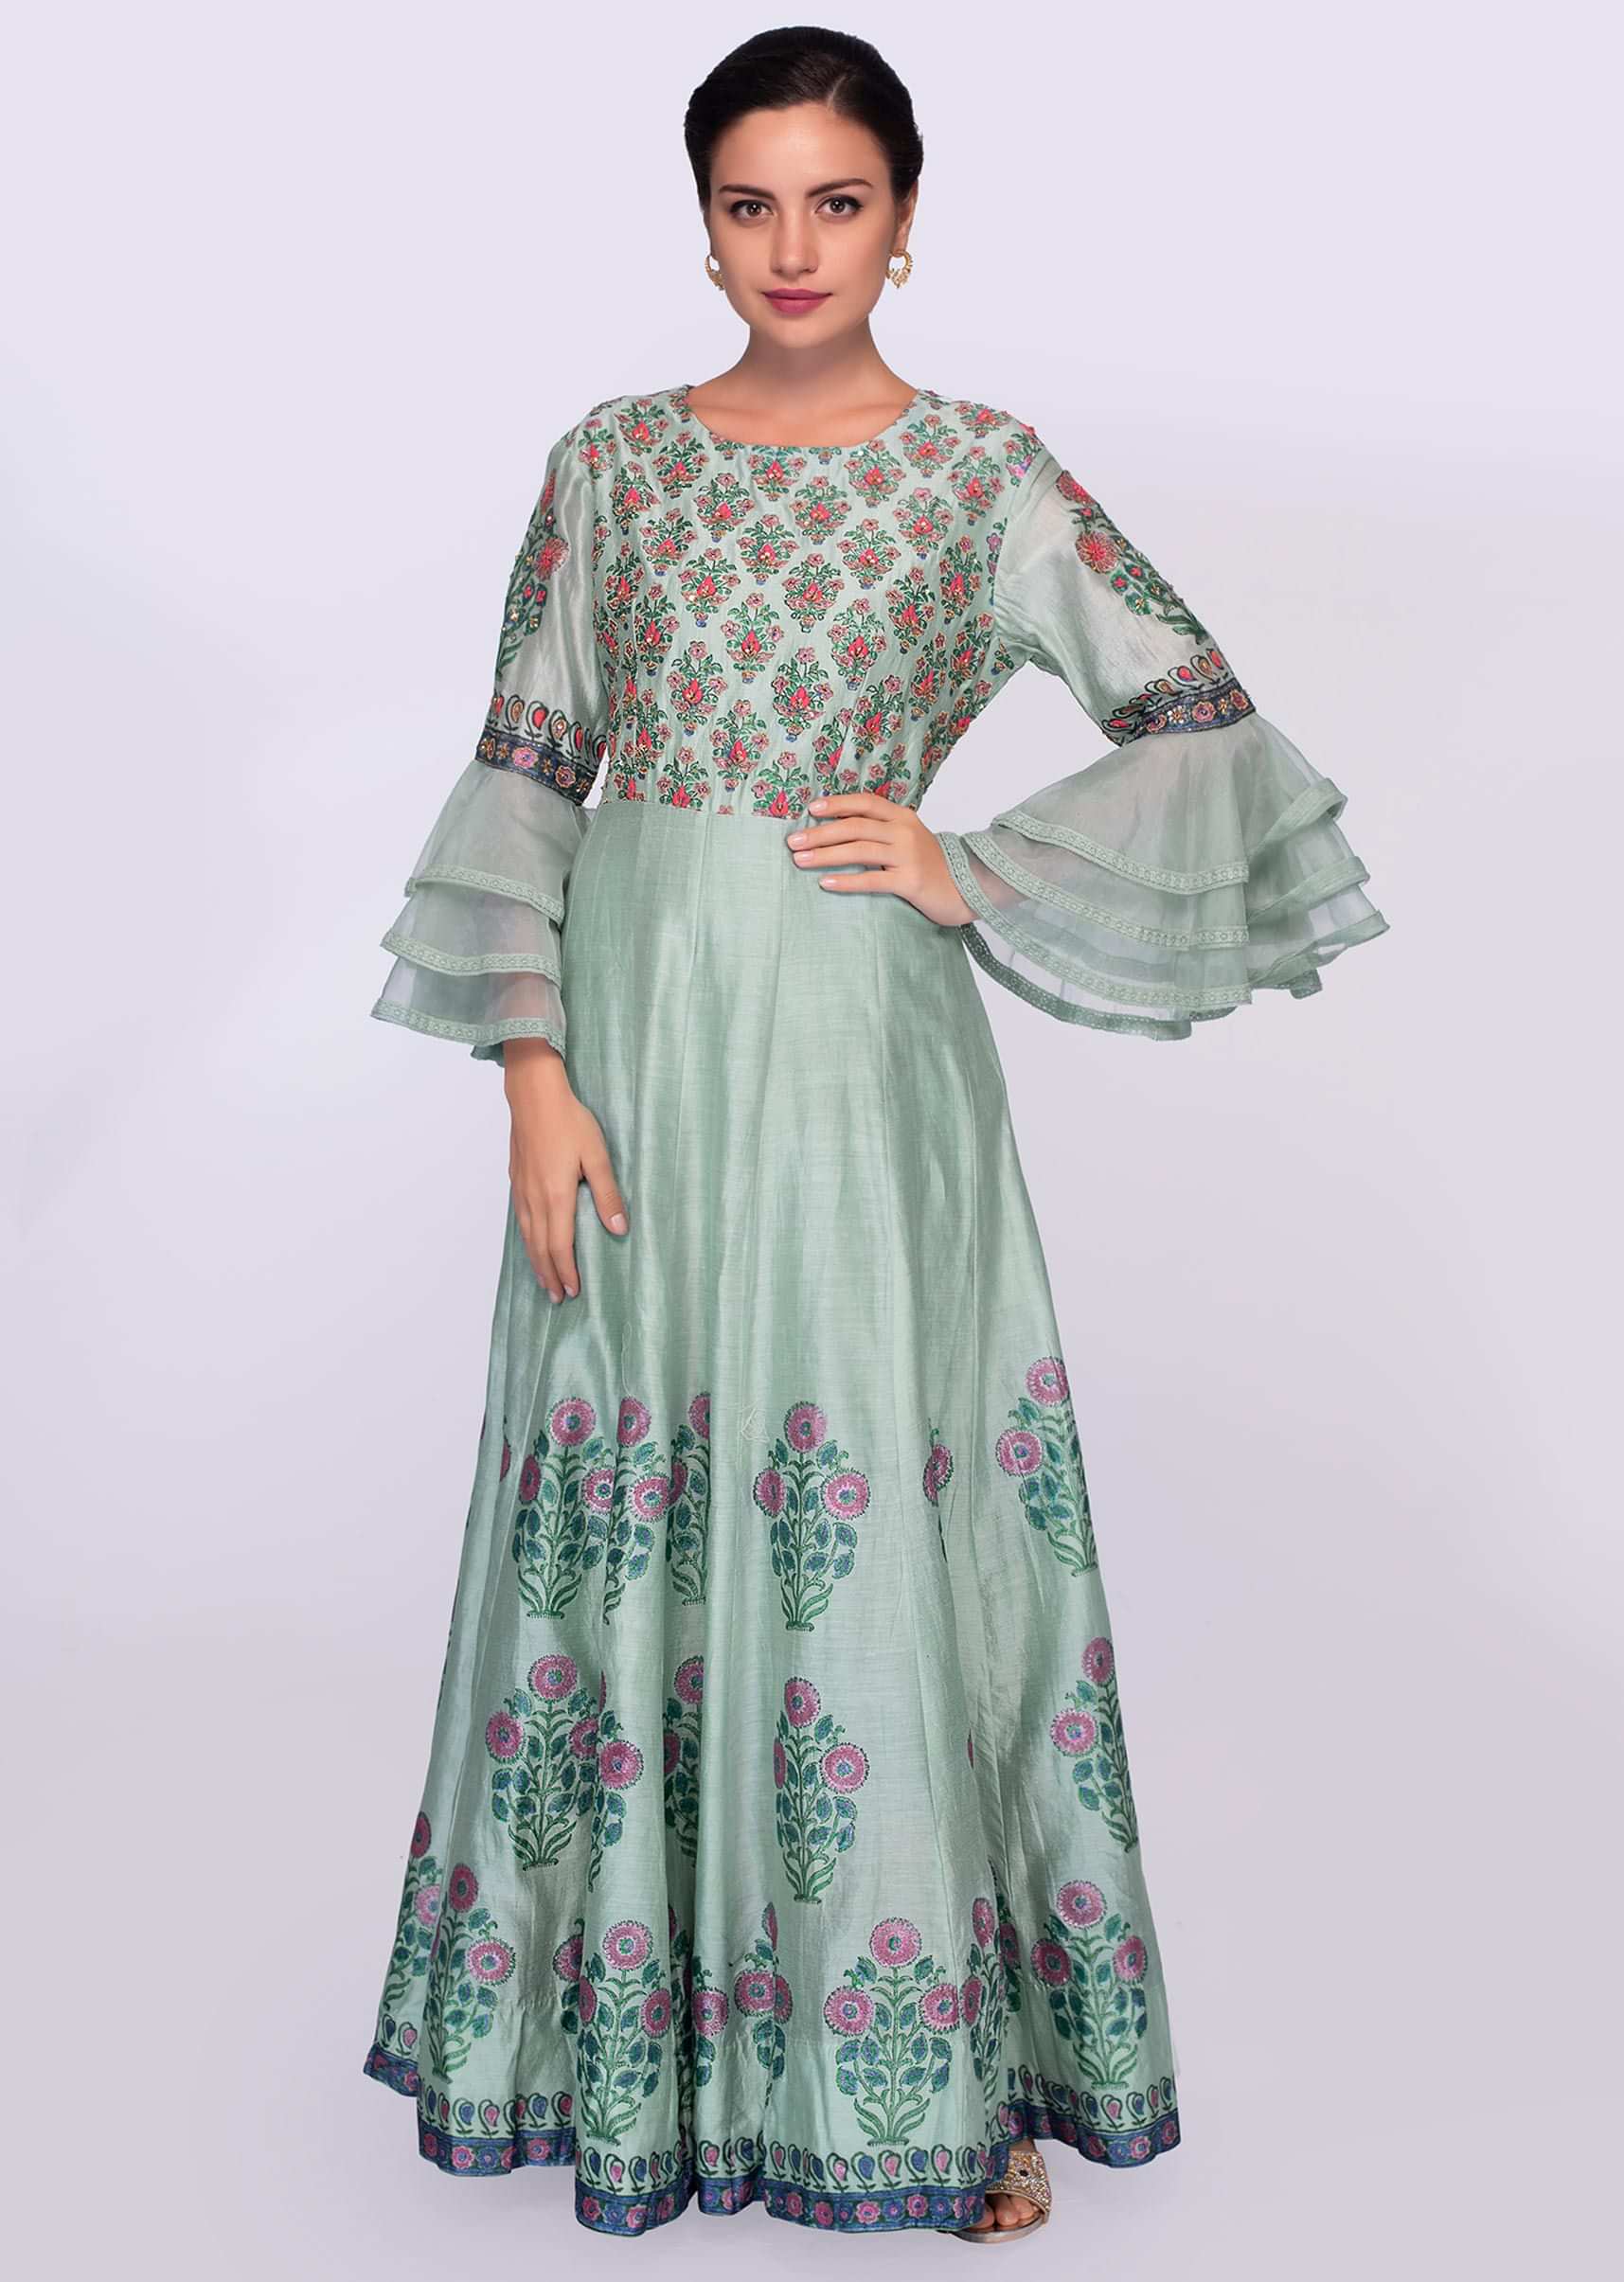 Turq blue cotton anarkali dress with  floral  printed butt